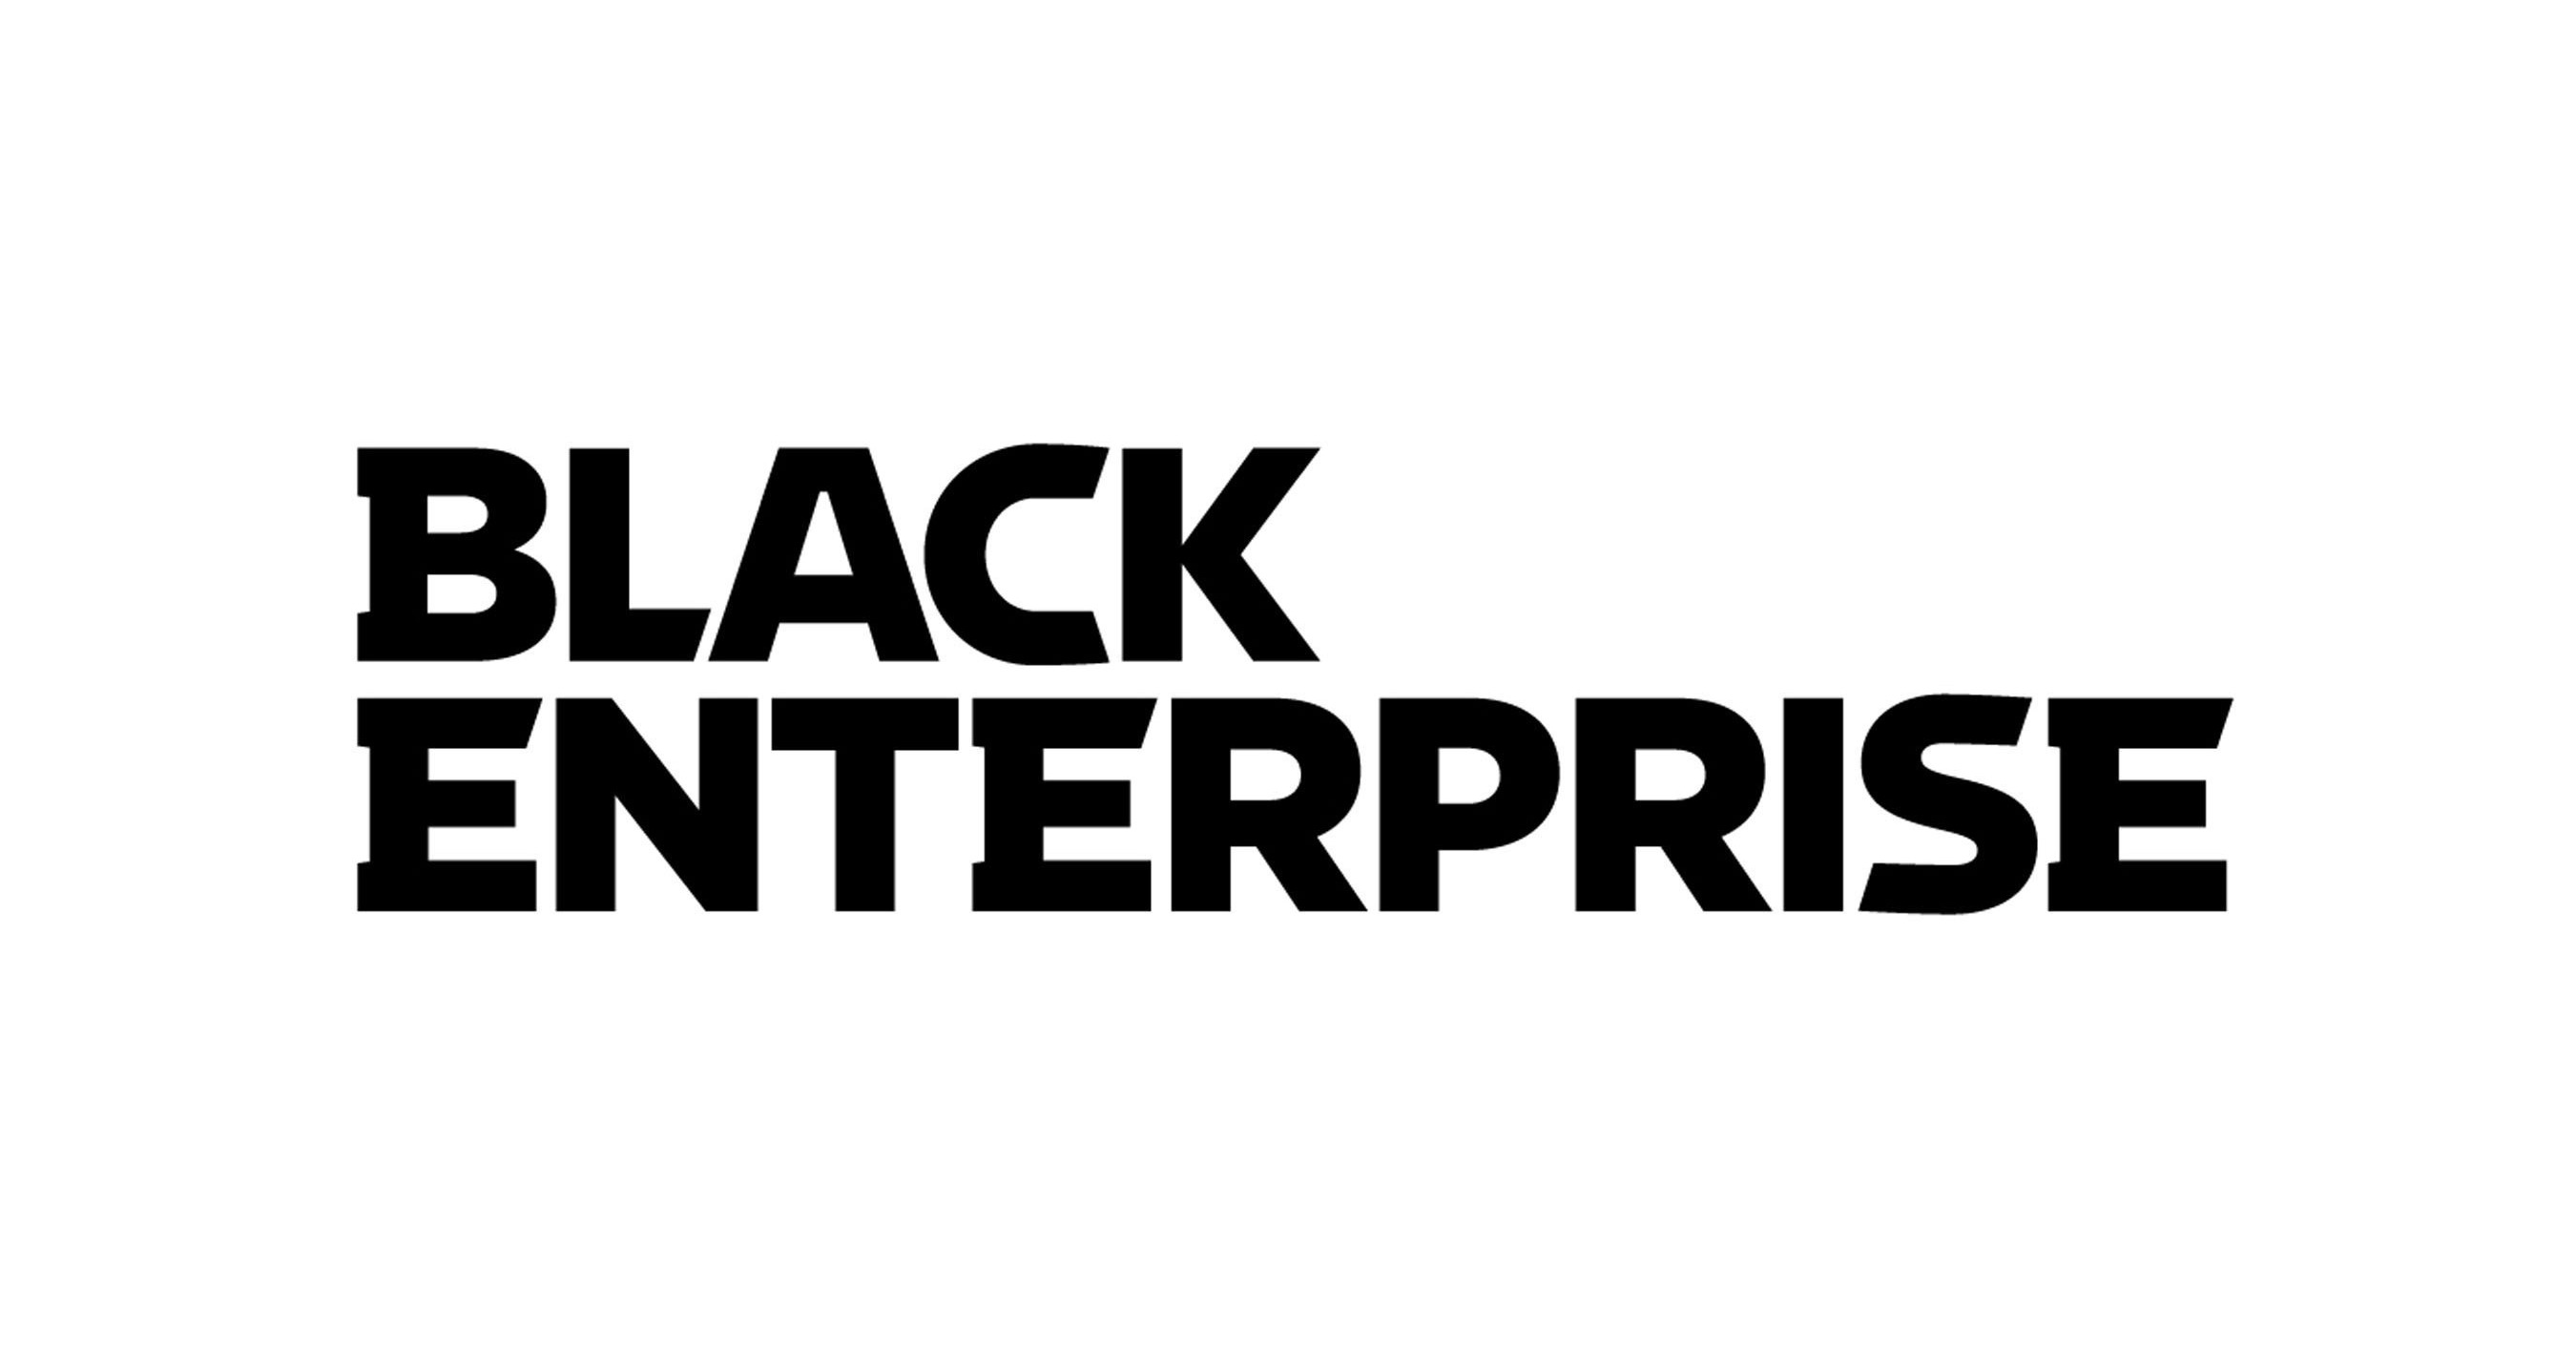 BLACK ENTERPRISE AND AMERICAN AIRLINES BRING TOGETHER STUDENTS FROM 19 HISTORICALLY BLACK COLLEGES AND UNIVERSITIES FOR ITS 7TH ANNUAL BE SMART HACKATHON